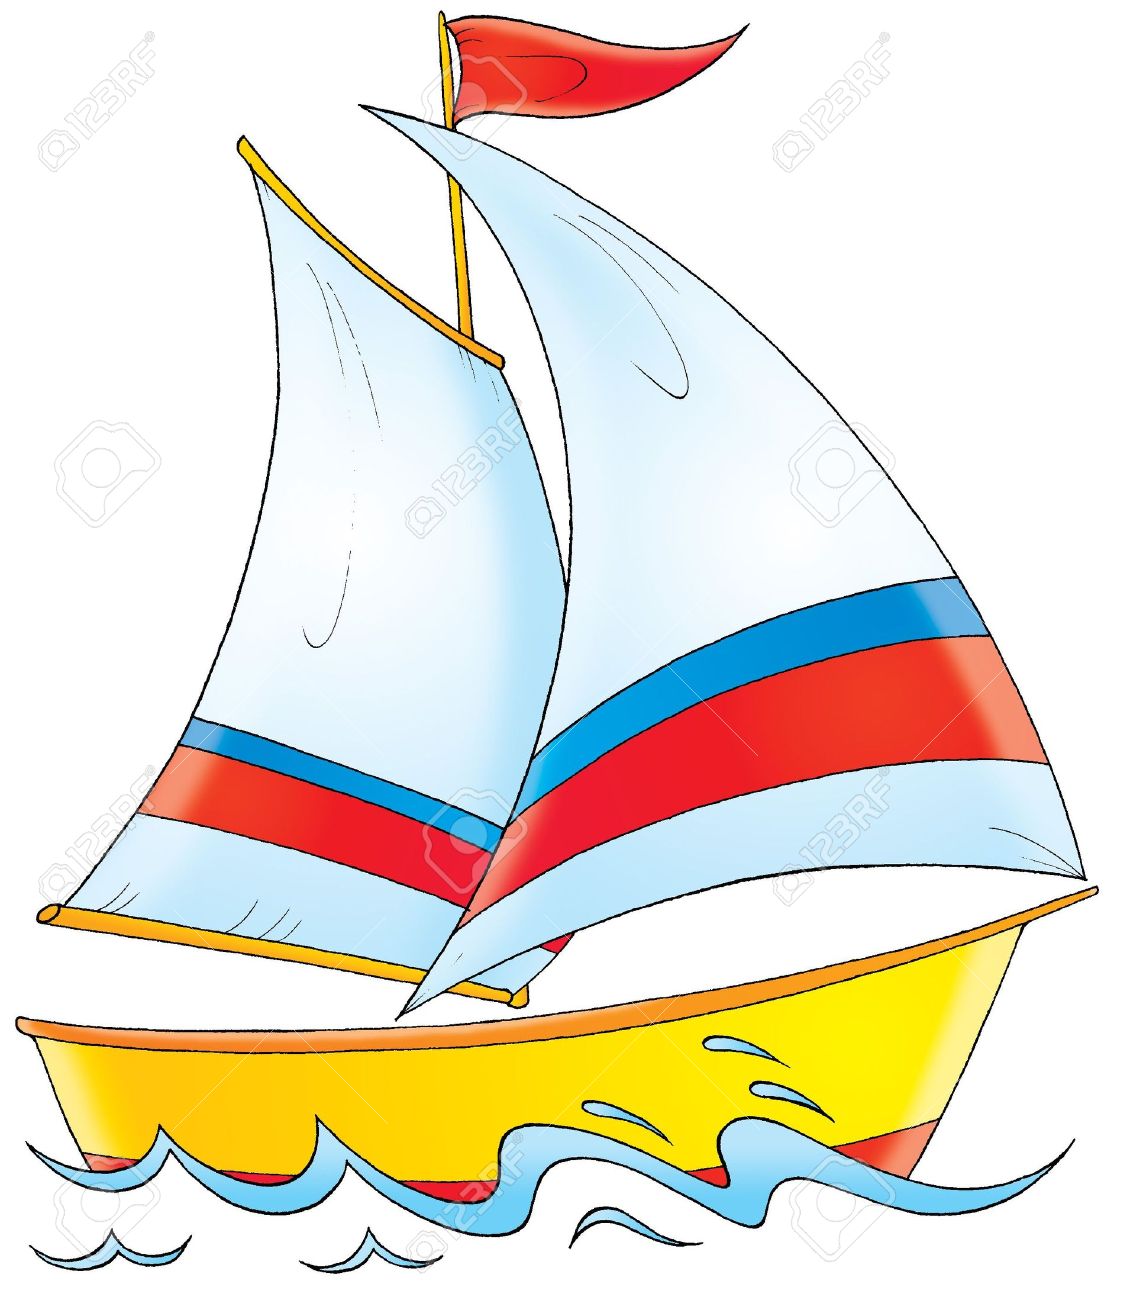 527 Yacht free clipart.